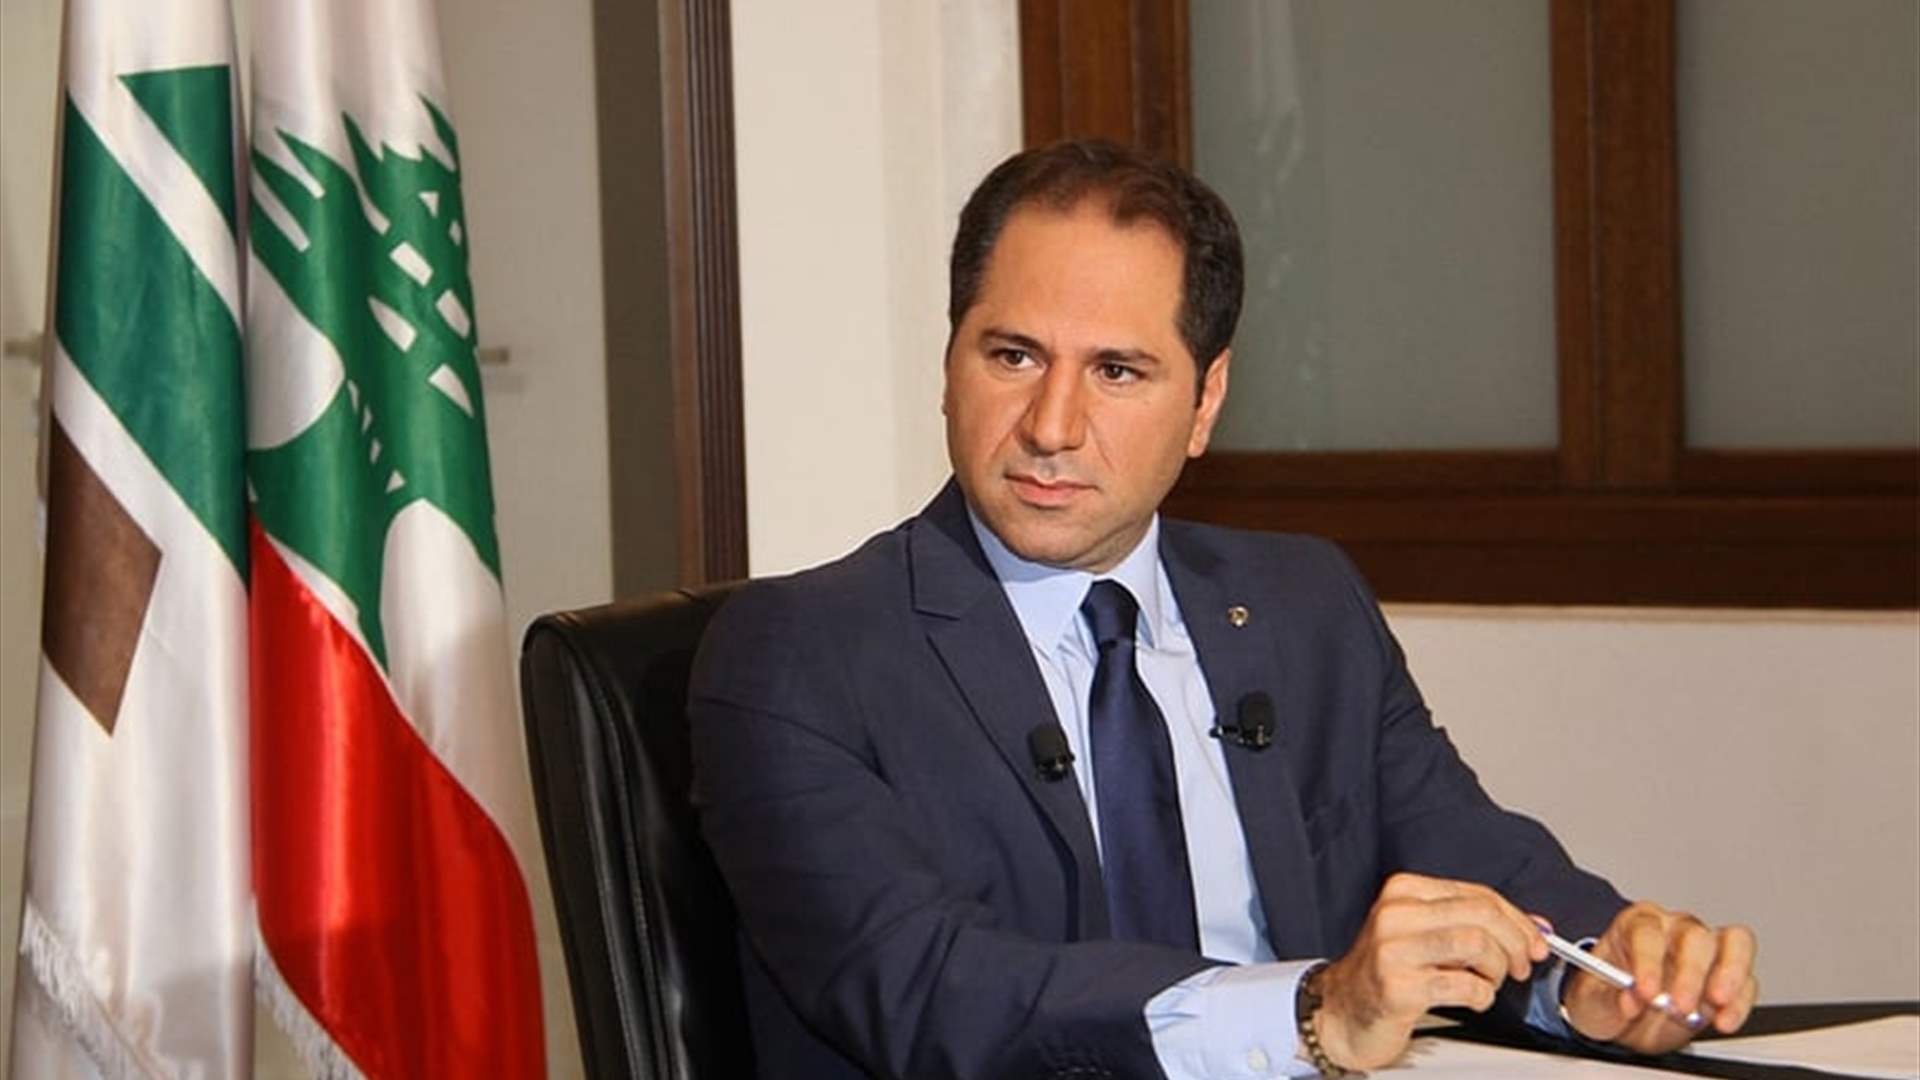 On LBCI, Samy Gemayel criticizes parliament session, emphasizes Hezbollah&#39;s role in displacement crisis - Interview highlights 